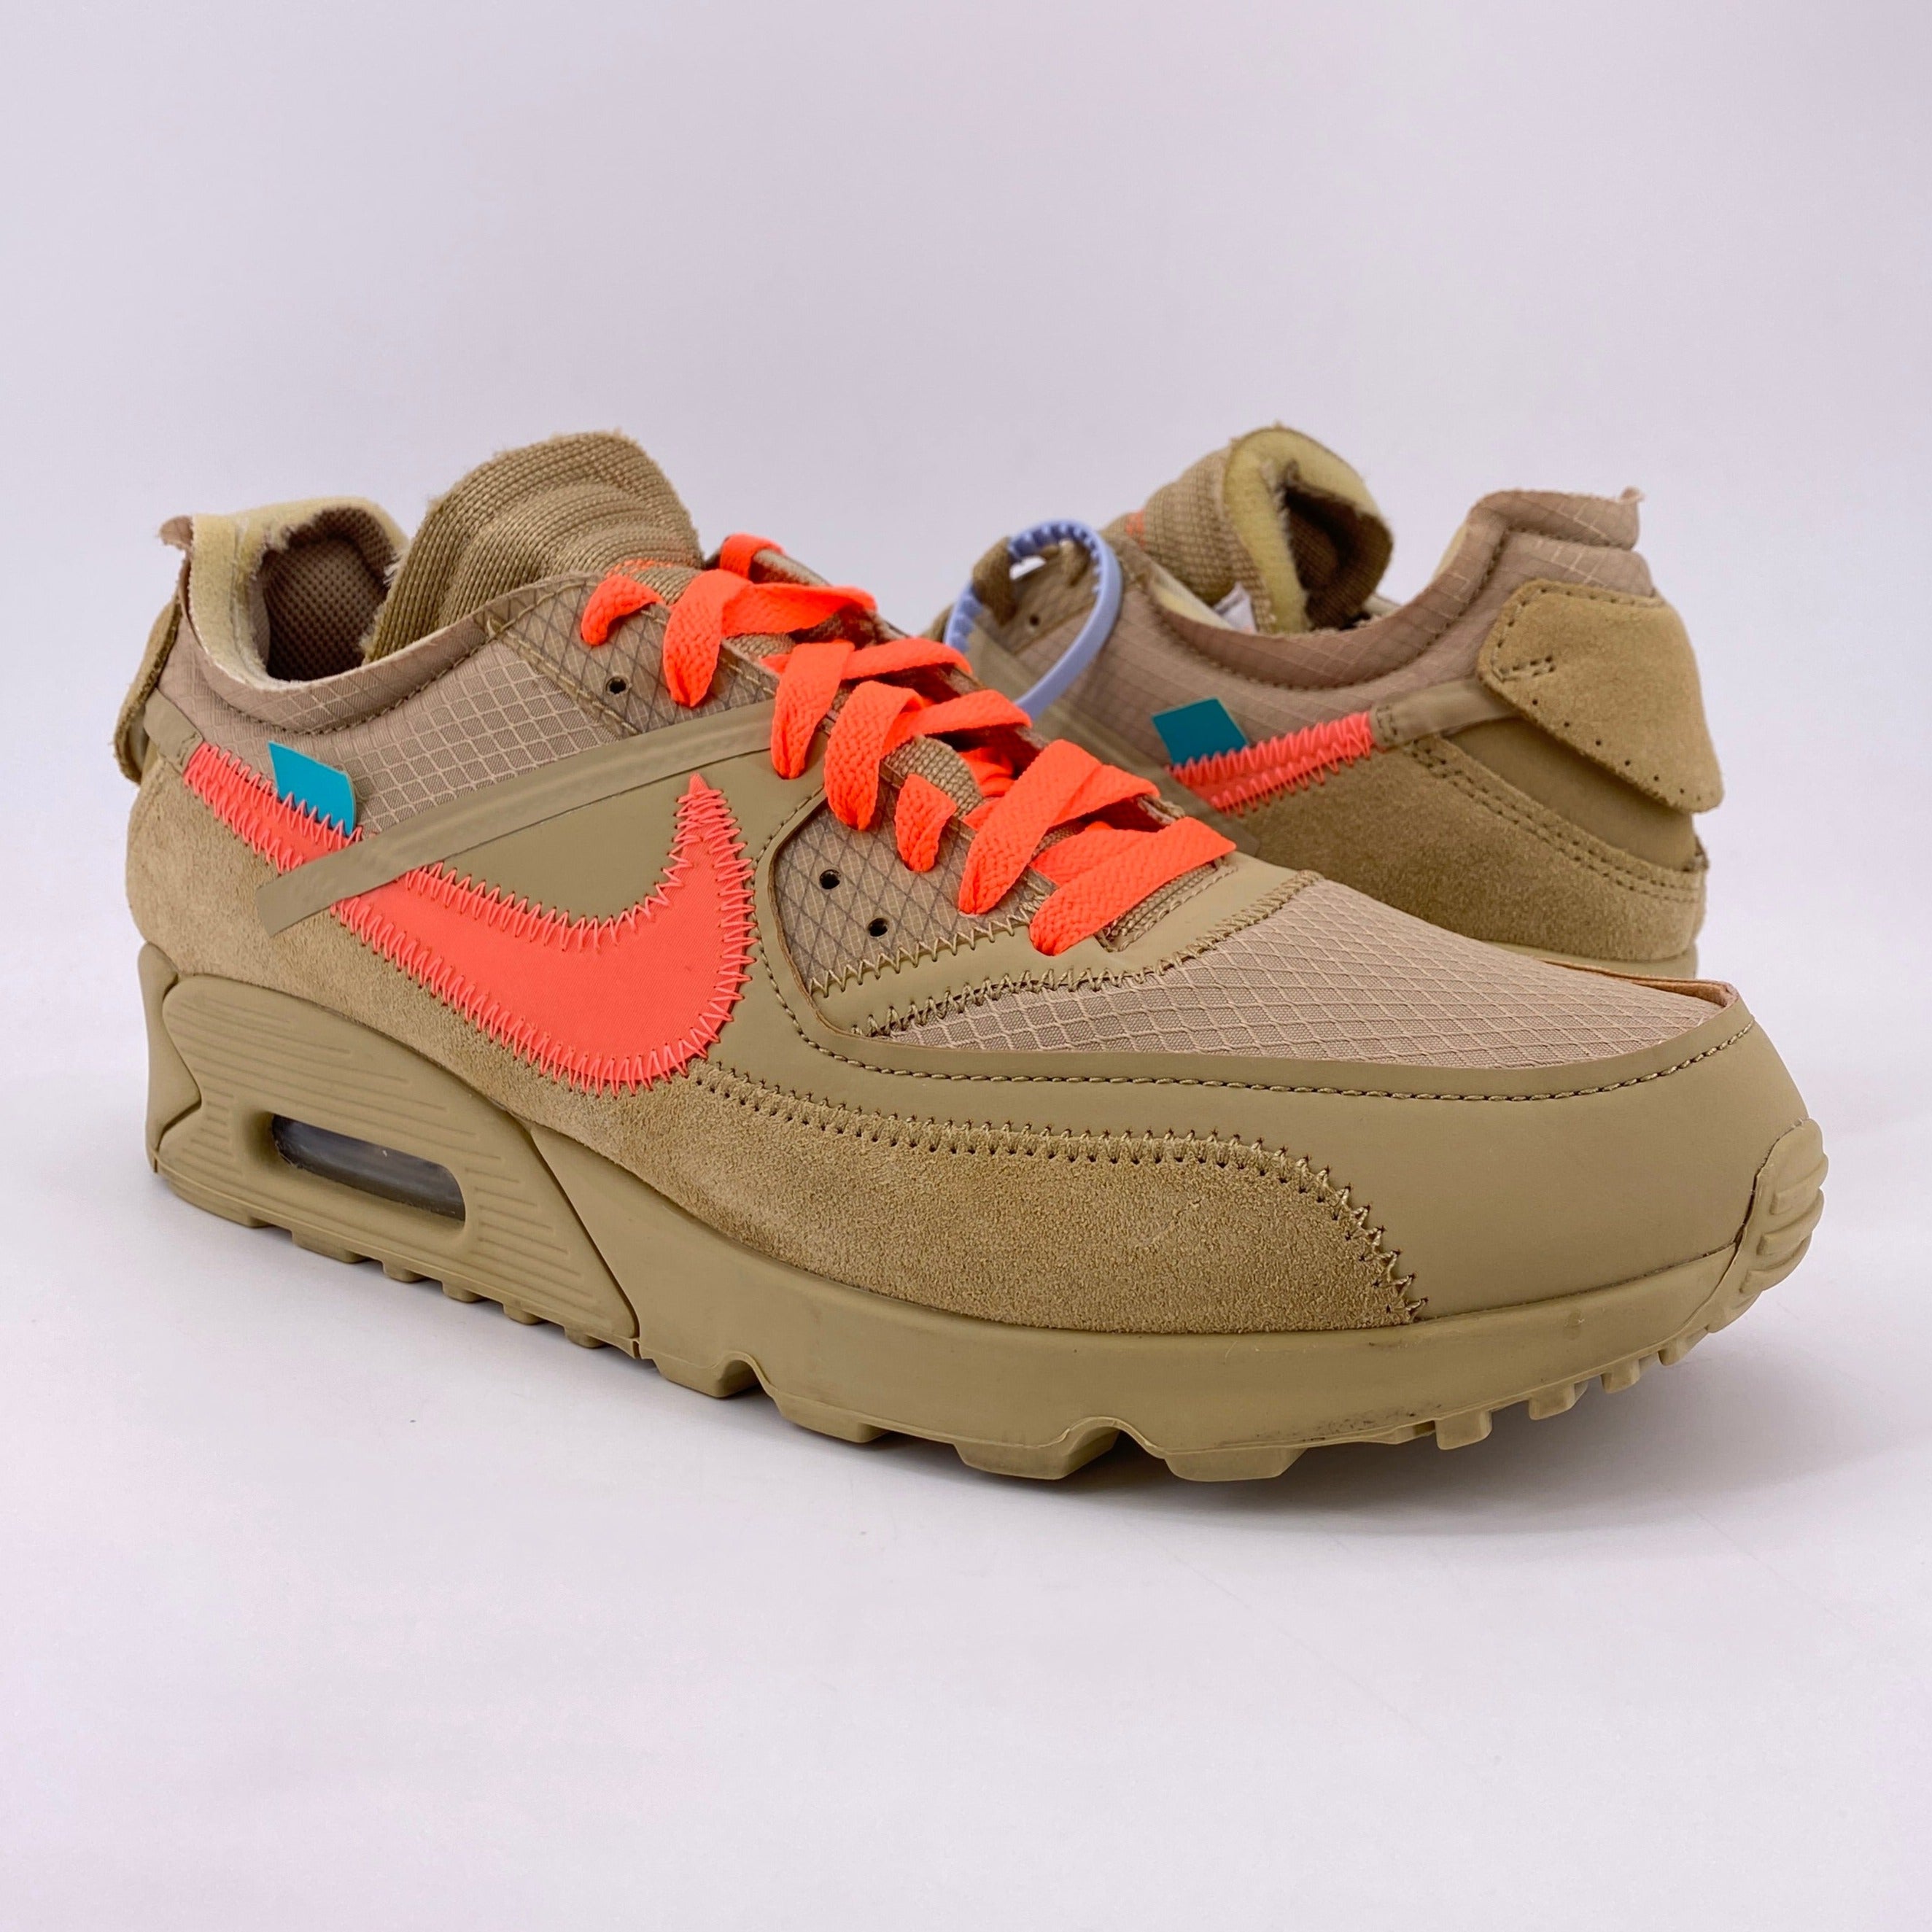 Nike Air Max 90 / OW "Desert Ore" 2019 Used Size 9.5